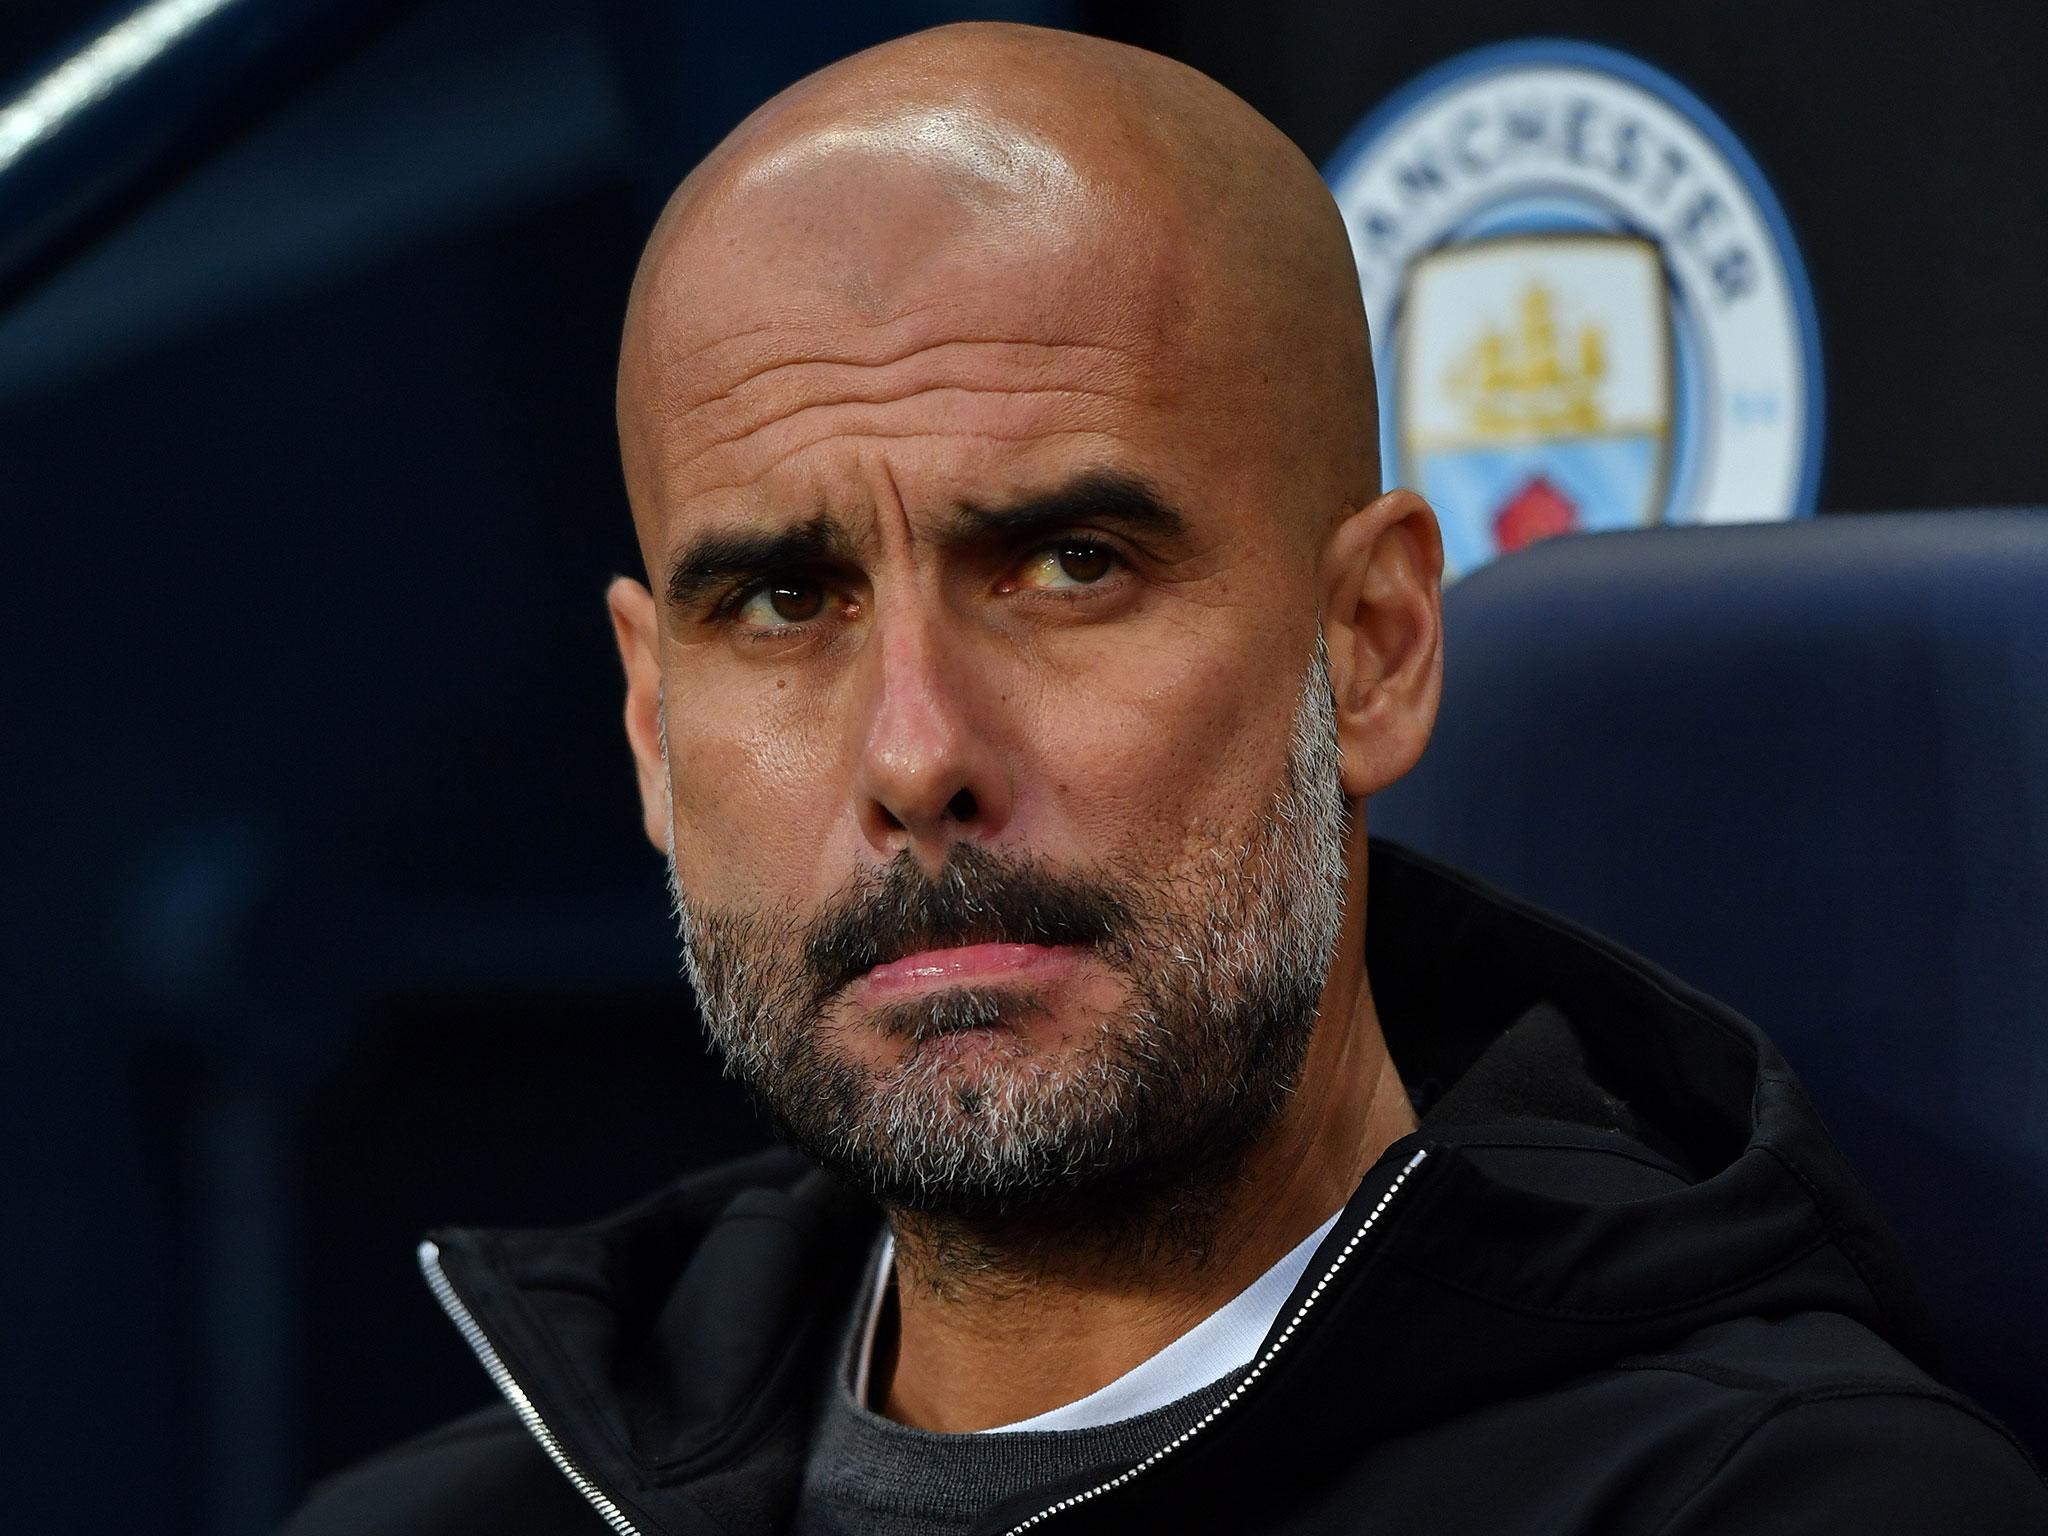 Pep Guardiola is yet to sign a contract extension at City